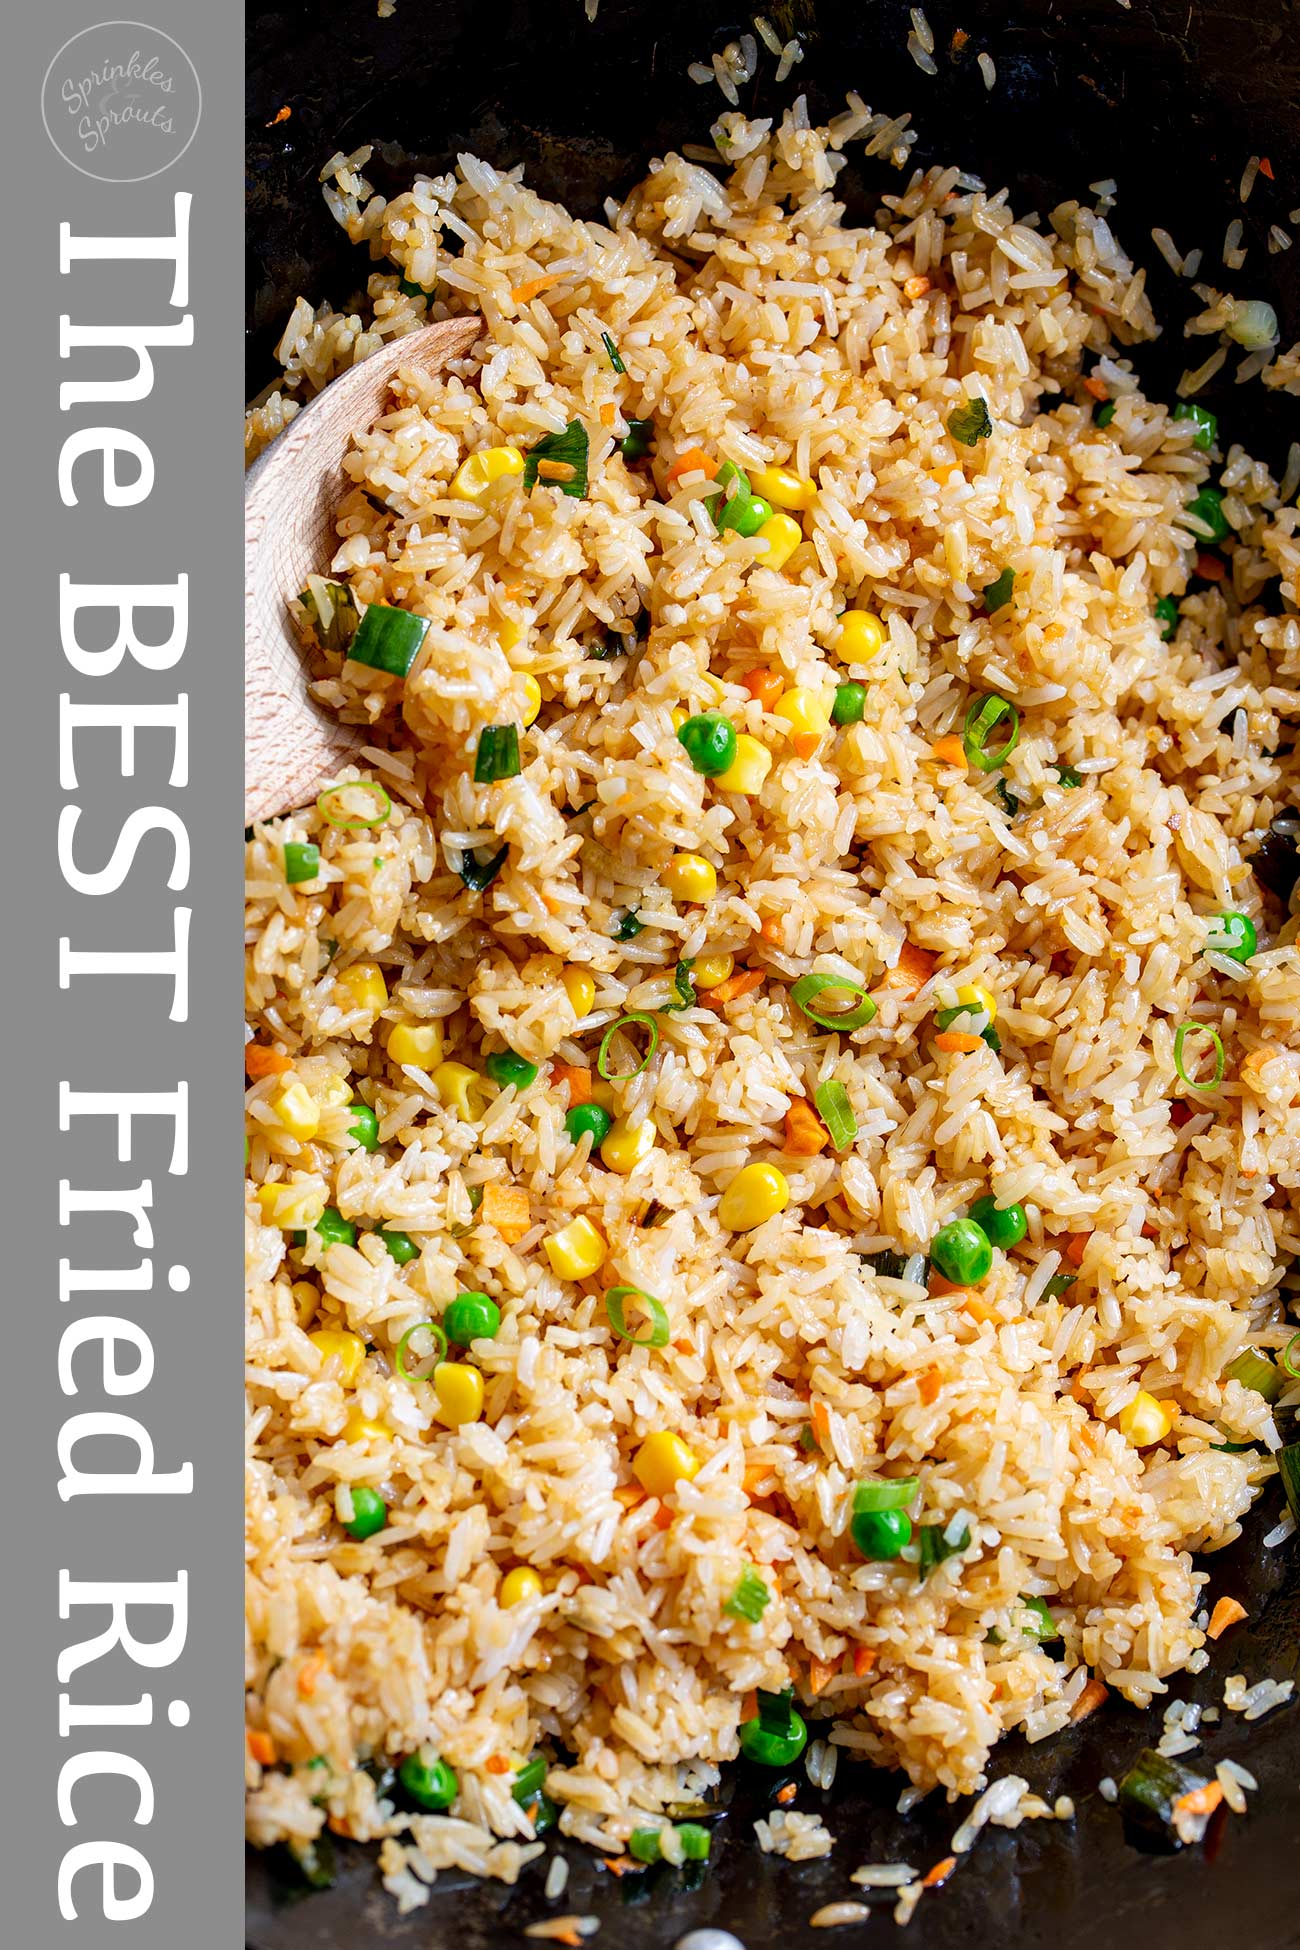 PINTEREST IMAGE - Fried rice with text overlay